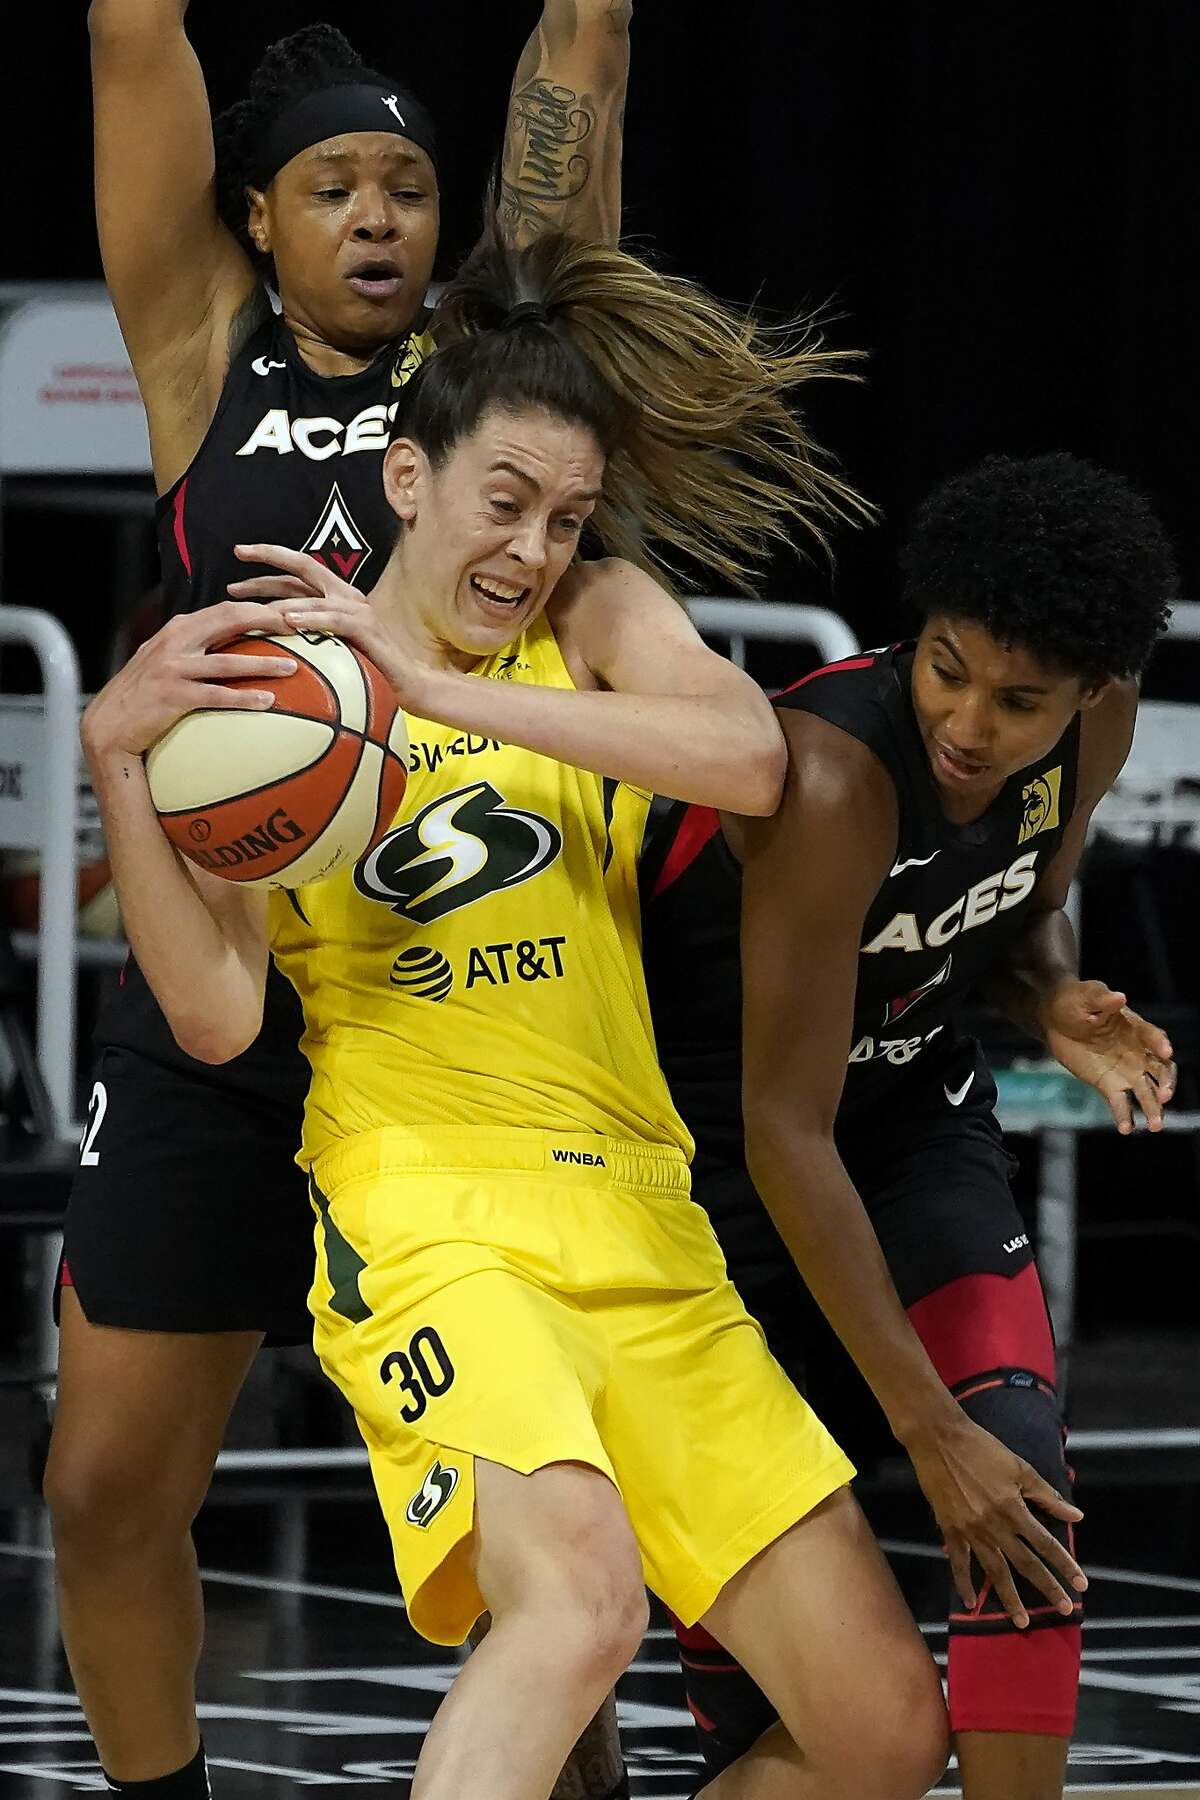 Seattle’s Breanna Stewart had 37 points and 15 rebounds.